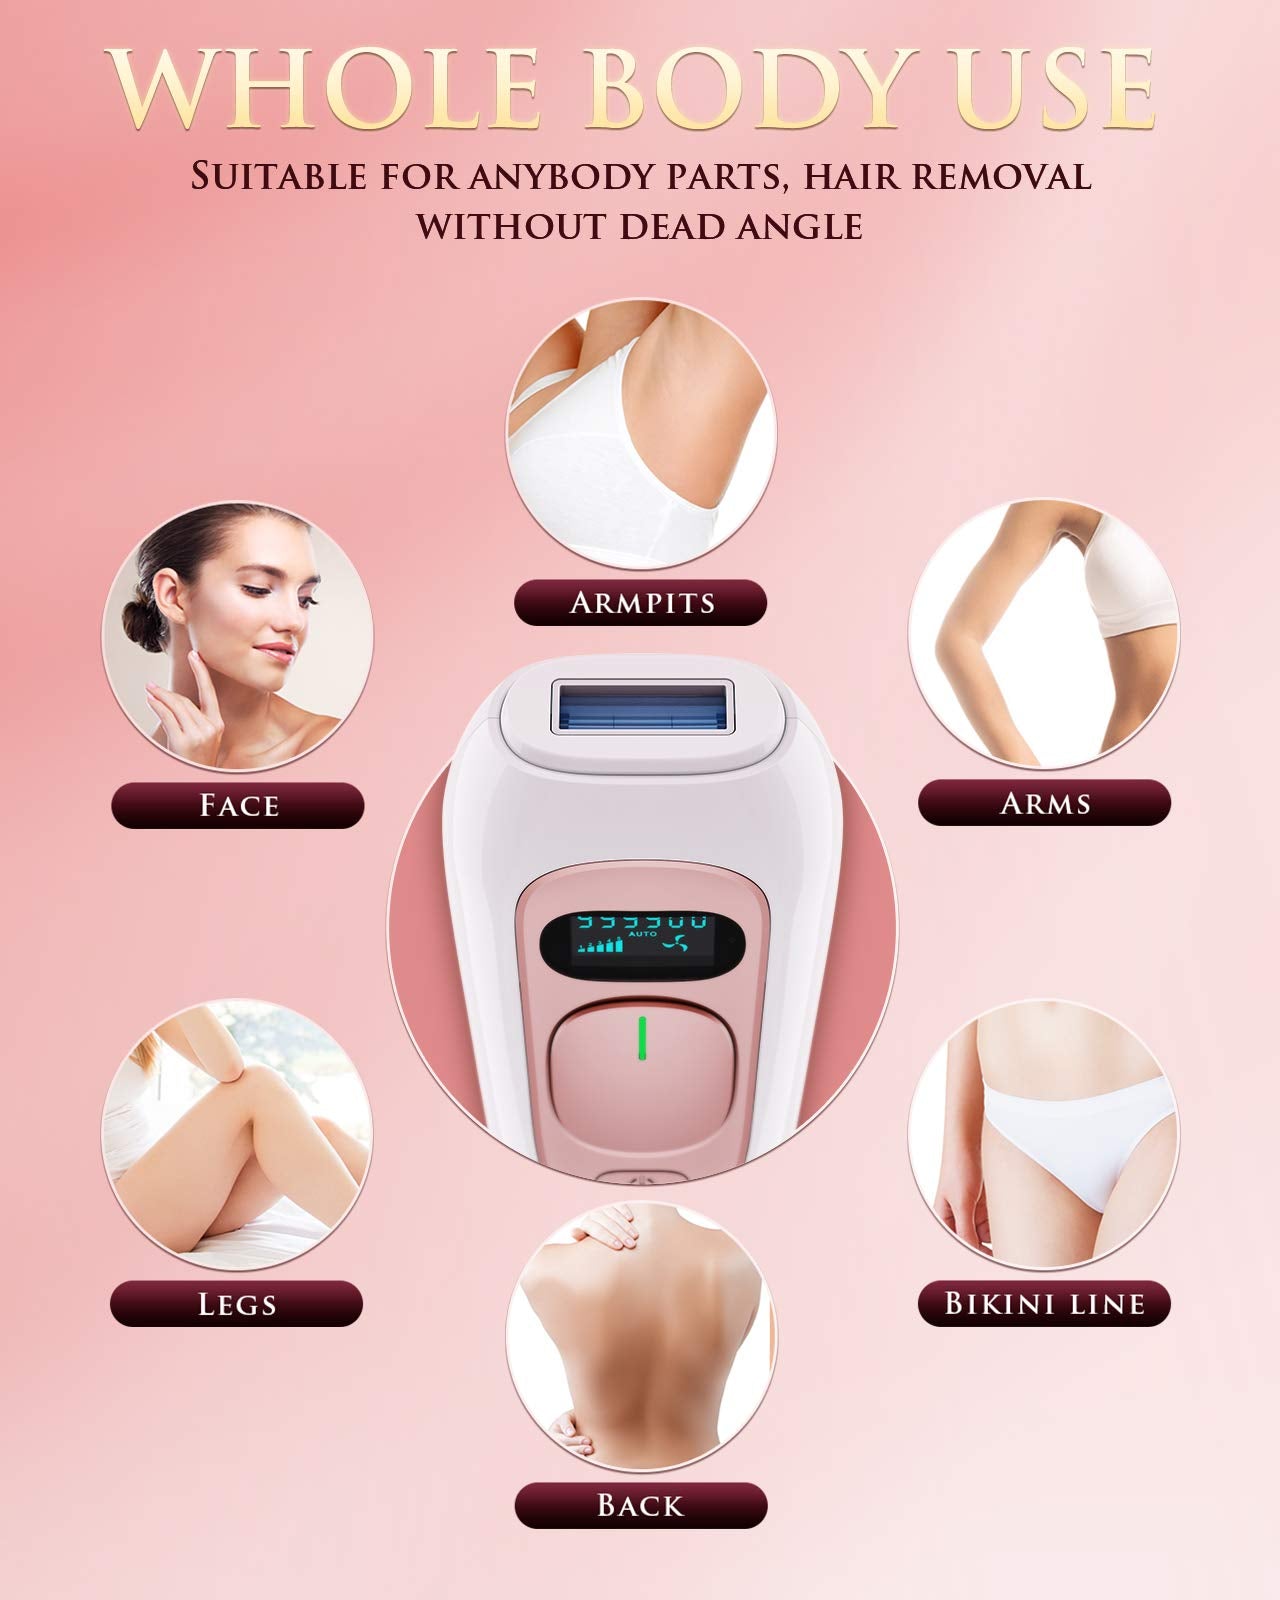 IPL Devices Hair Removal Laser with 5 Energy Levels